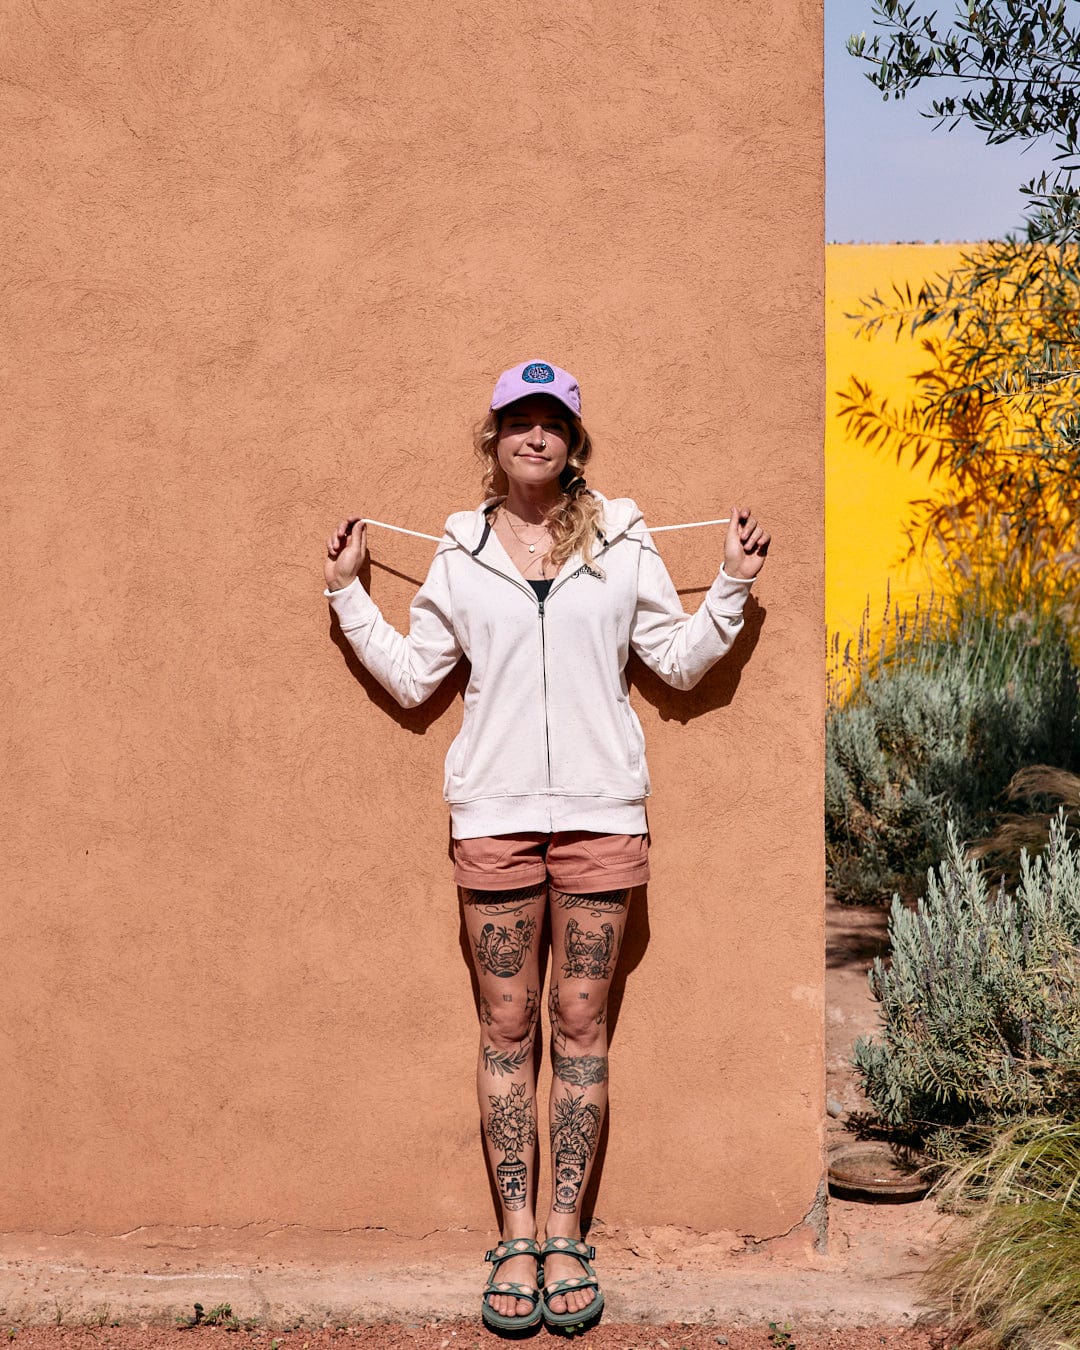 A person stands smiling in front of a pink wall, wearing a white Ginny - Womens Zip Hoodie - Cream with Saltrock branding, shorts, and sandals, and showing off tattoos on their legs.